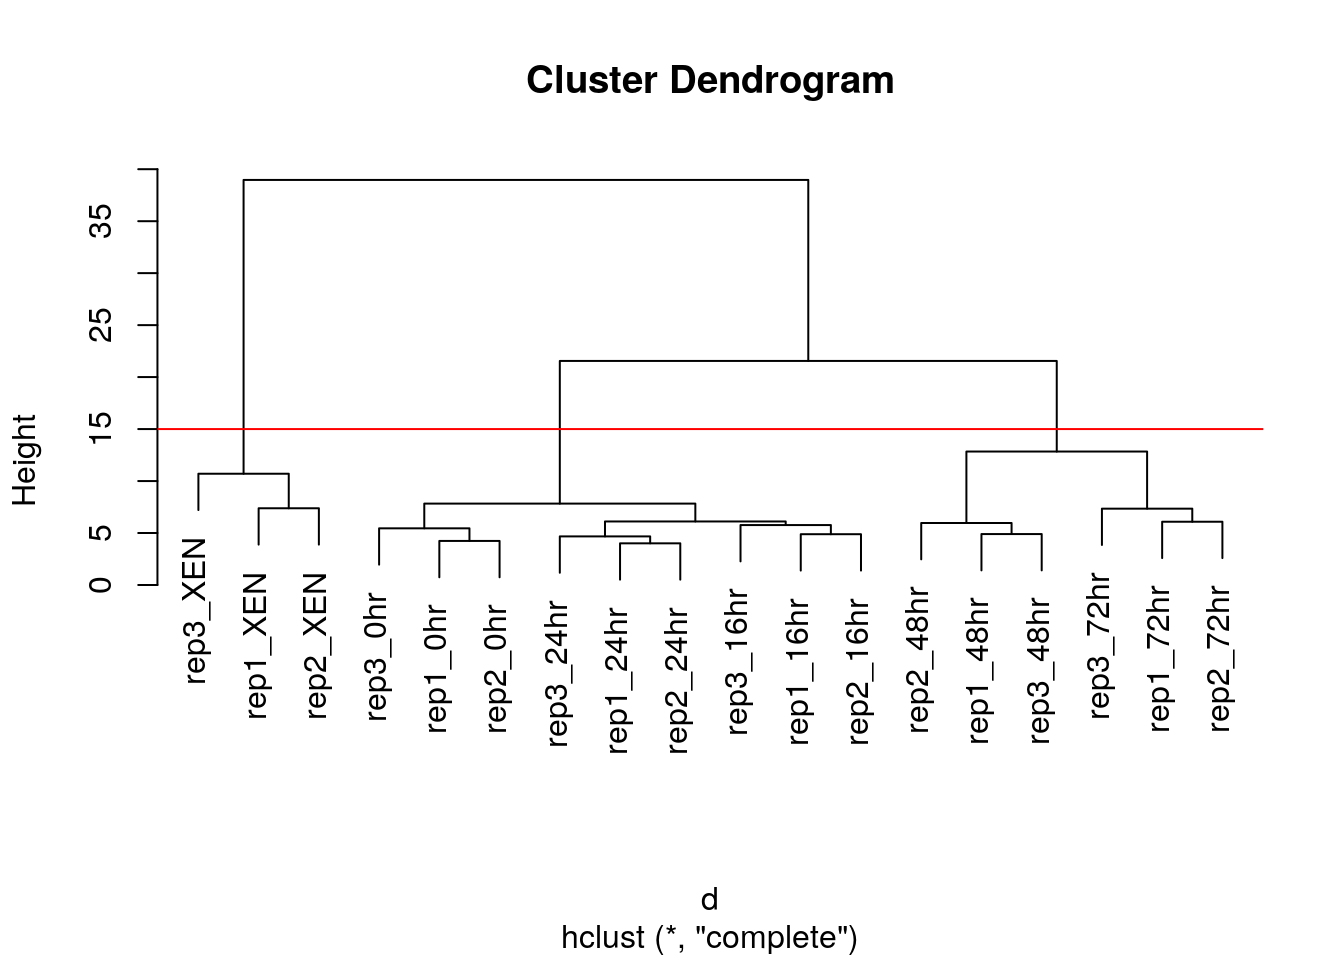 Cutting the dendrogram at height 15.